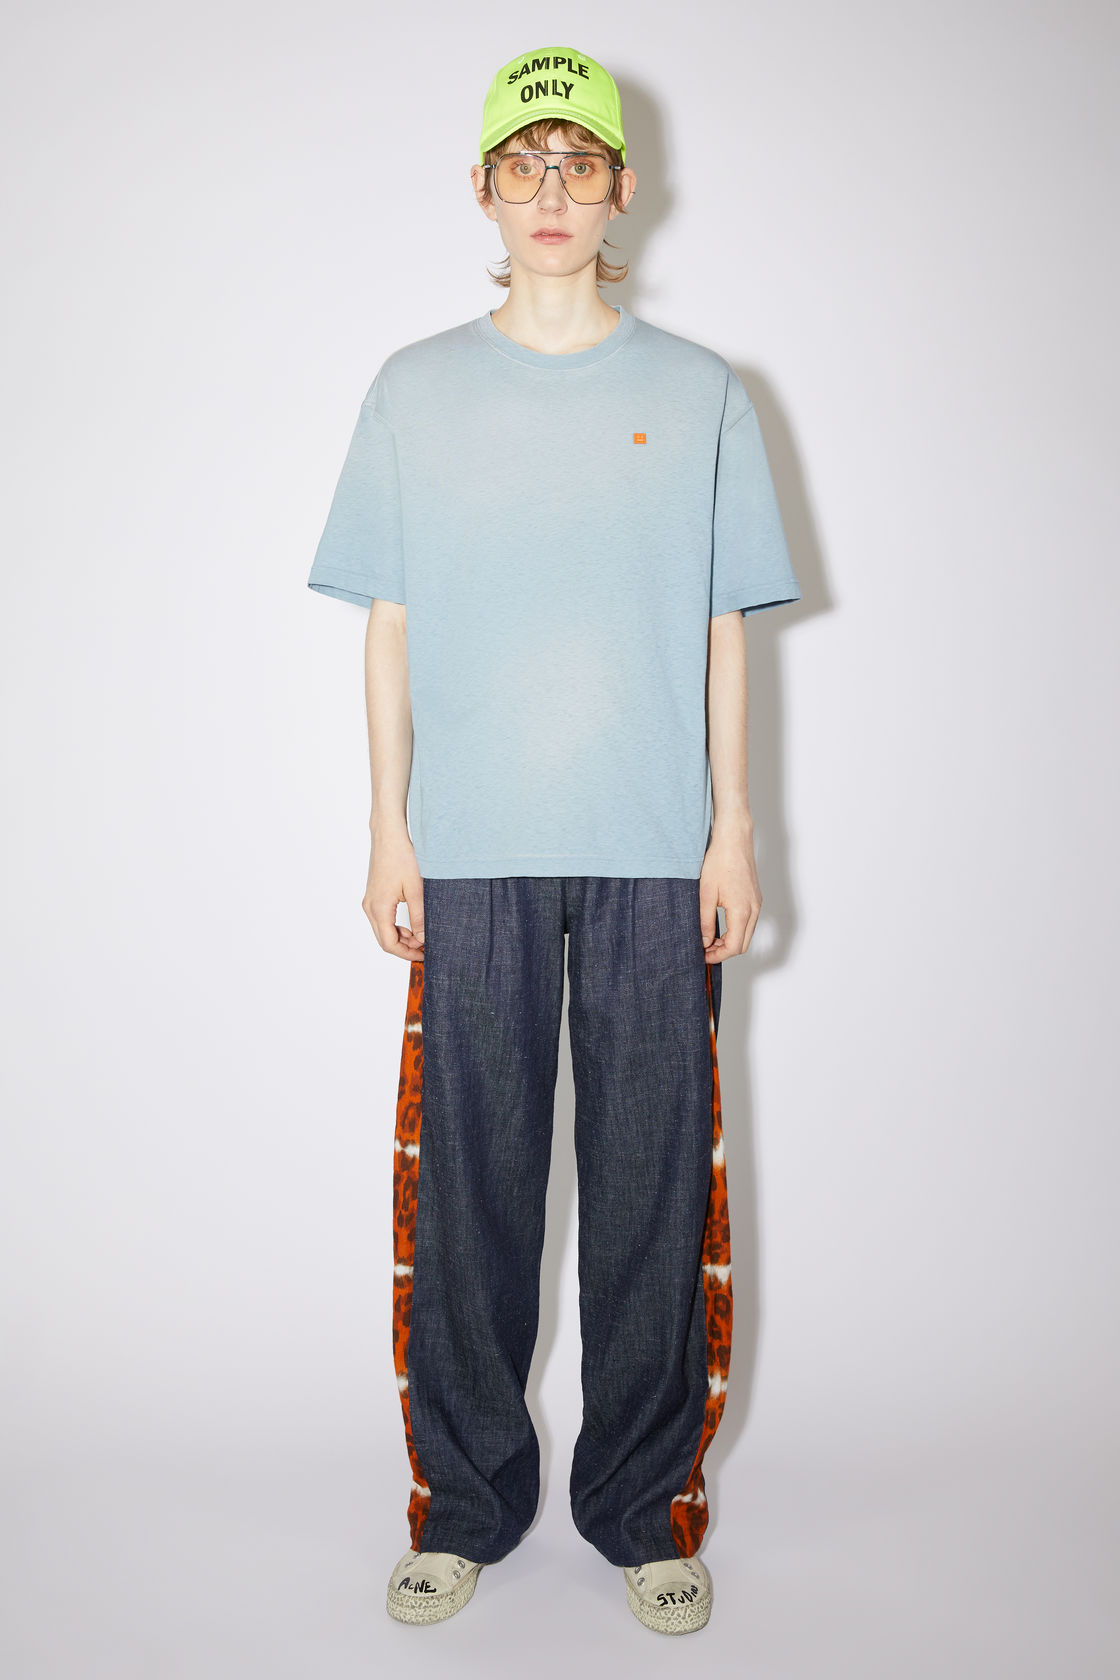 Acne Studios Face collection - Shop women’s clothing and accessories